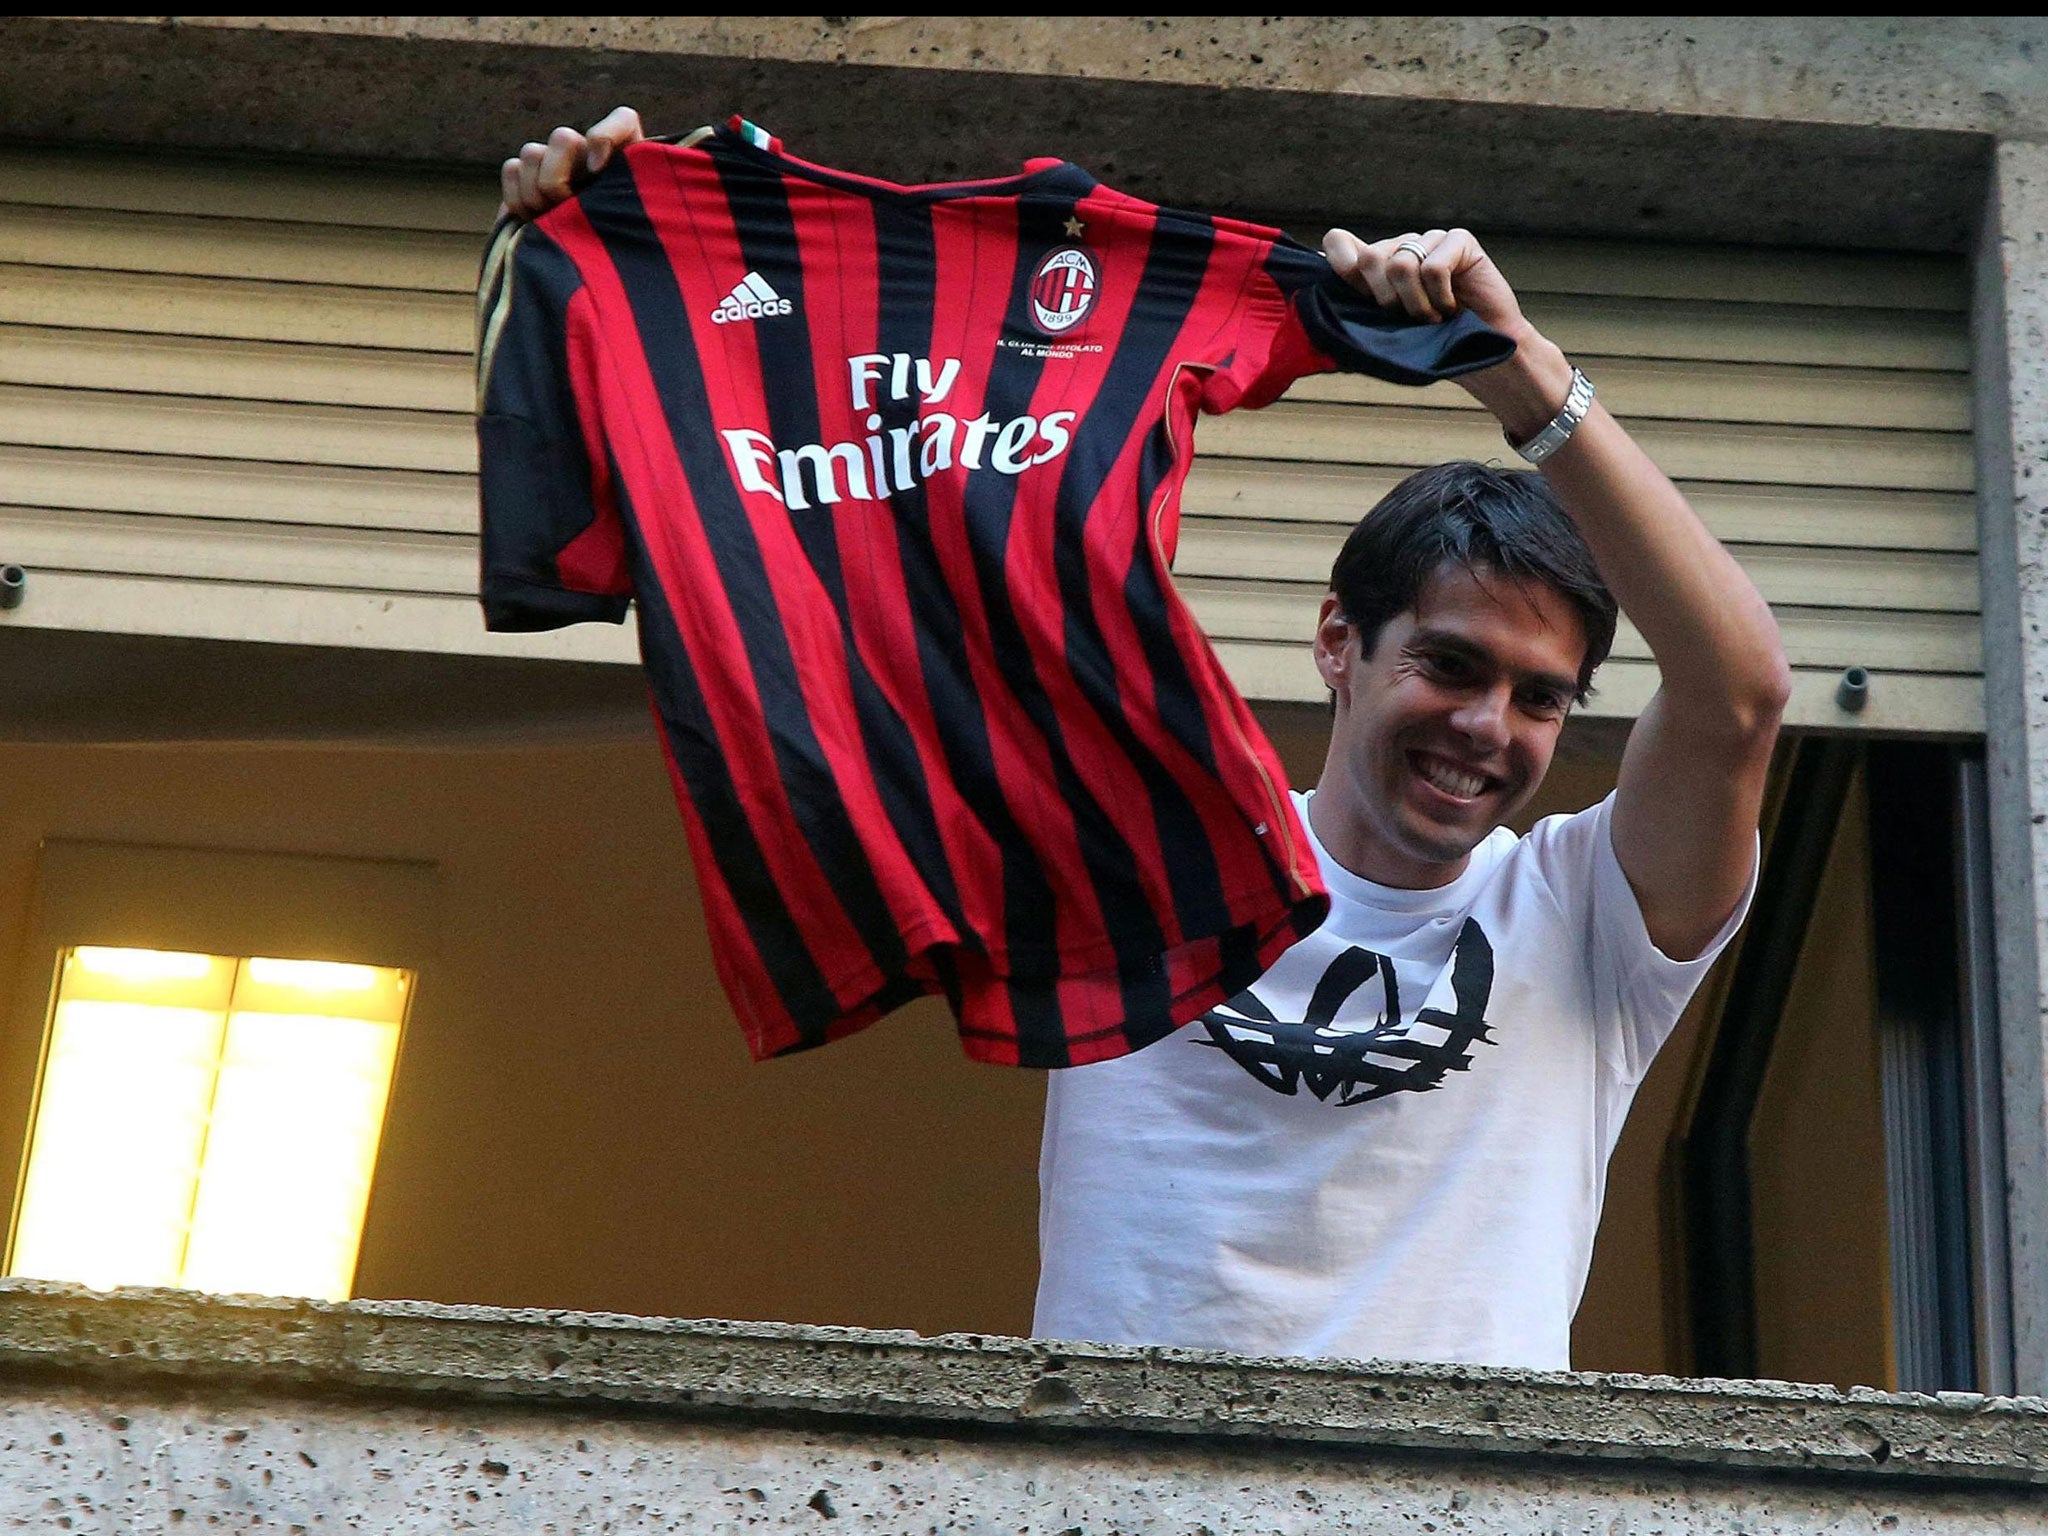 Transfer news: Kaka revels in return to Serie A with AC Milan